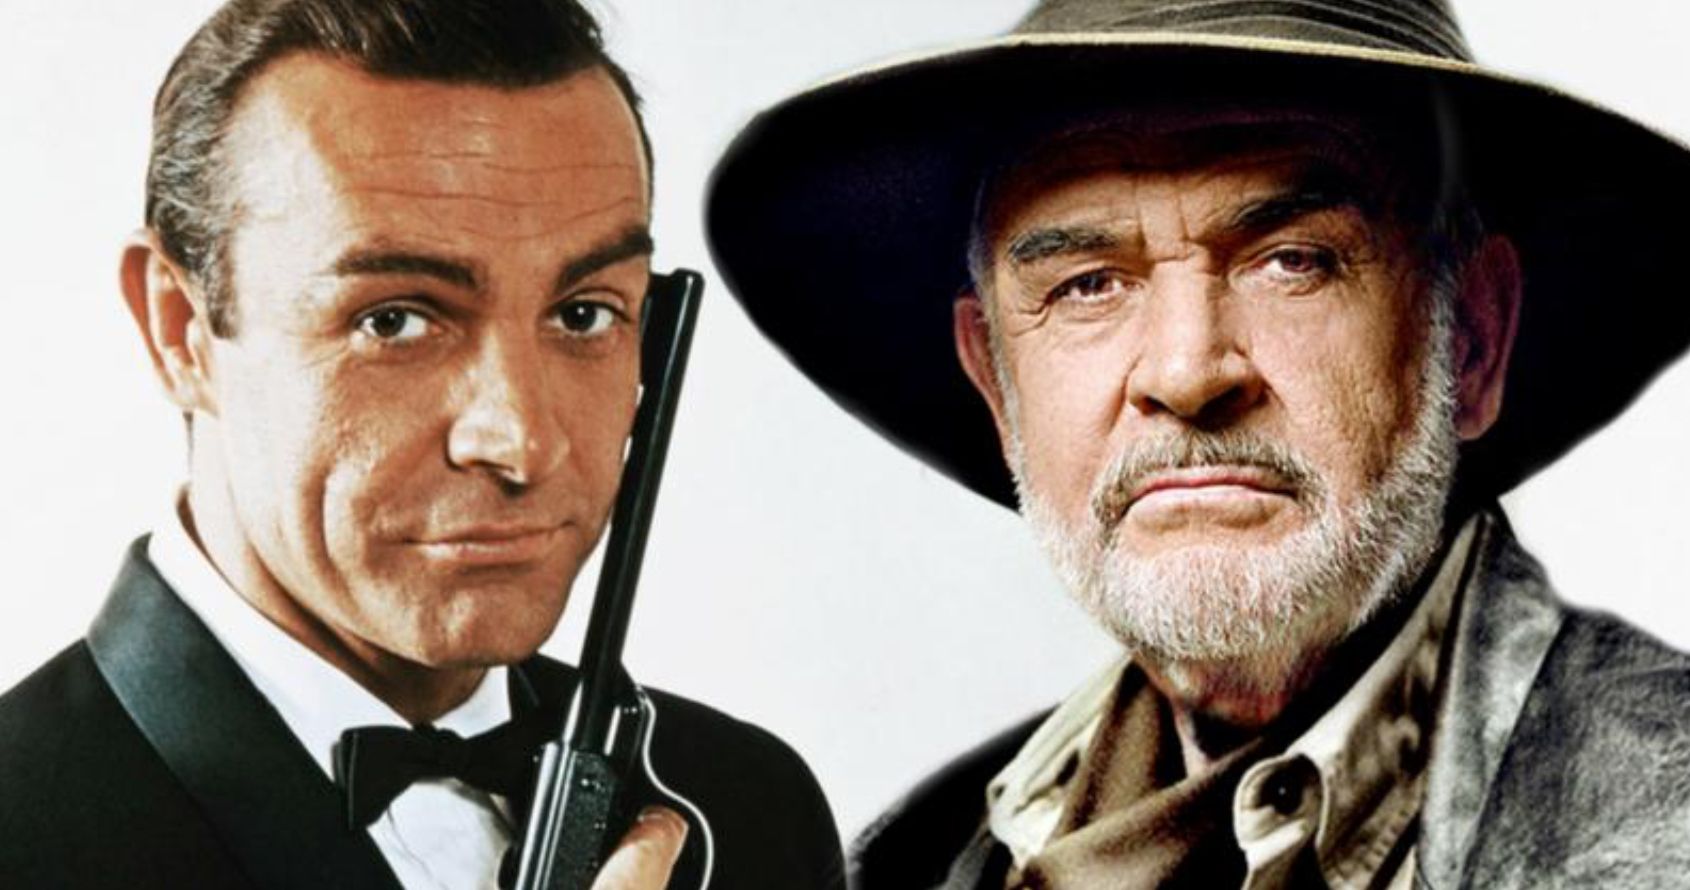 Sean Connery Dies, James Bond Icon and Oscar Winner Was 90